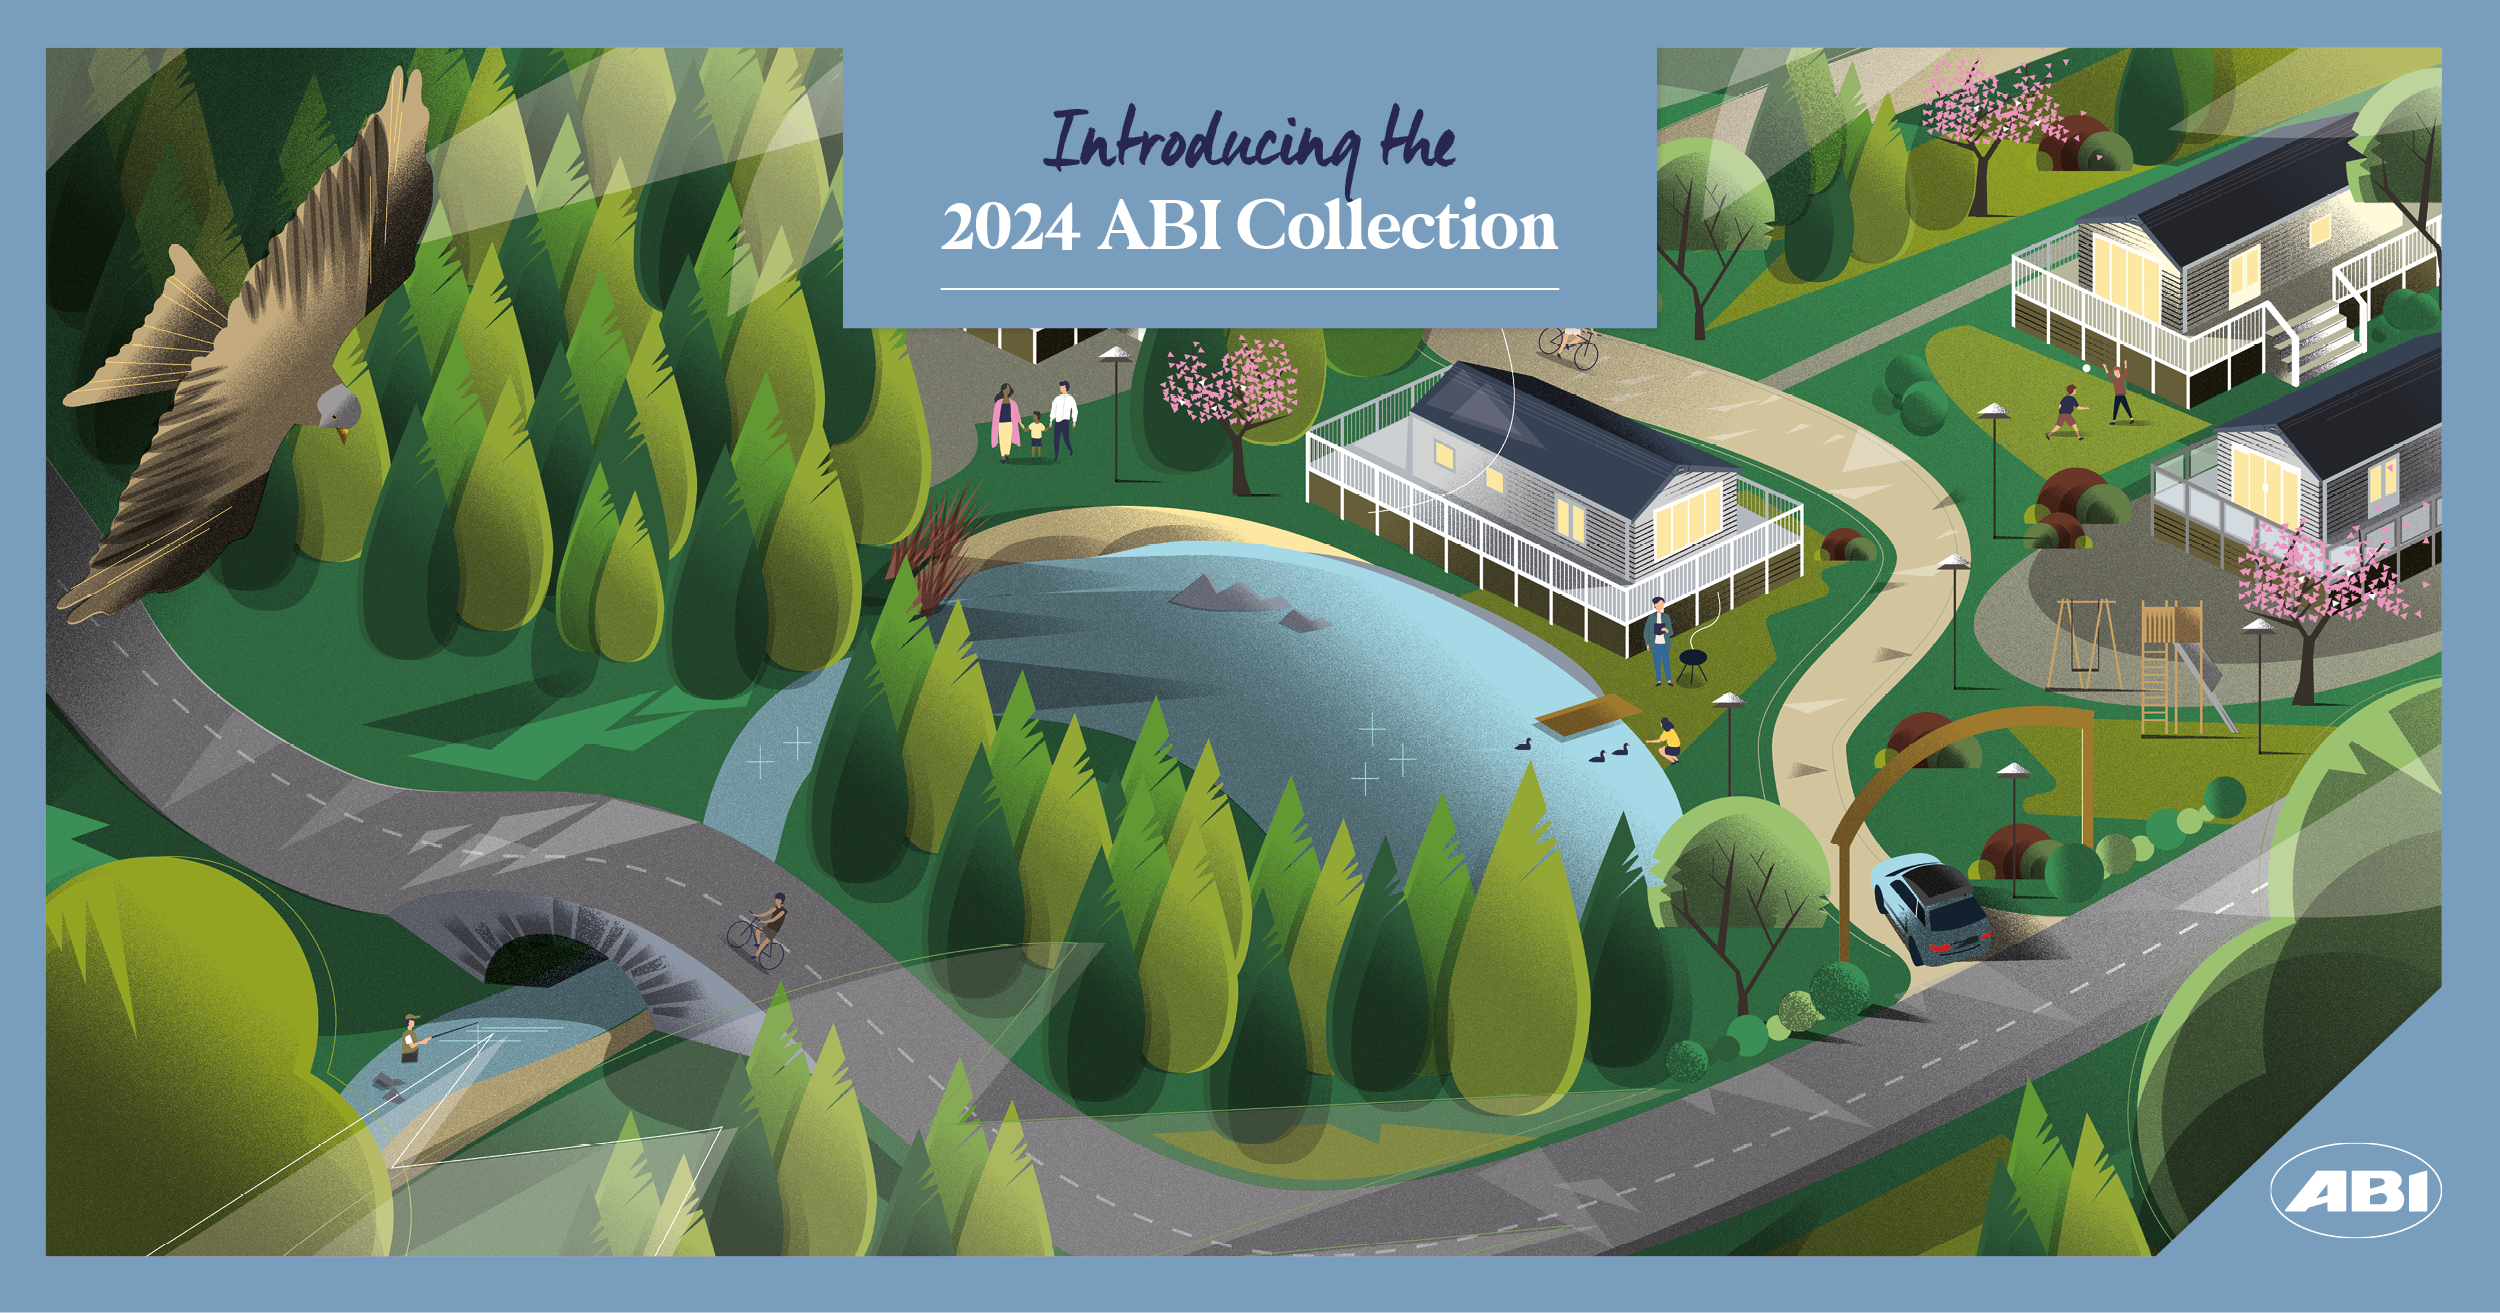 Introducing the 2024 ABI Collection